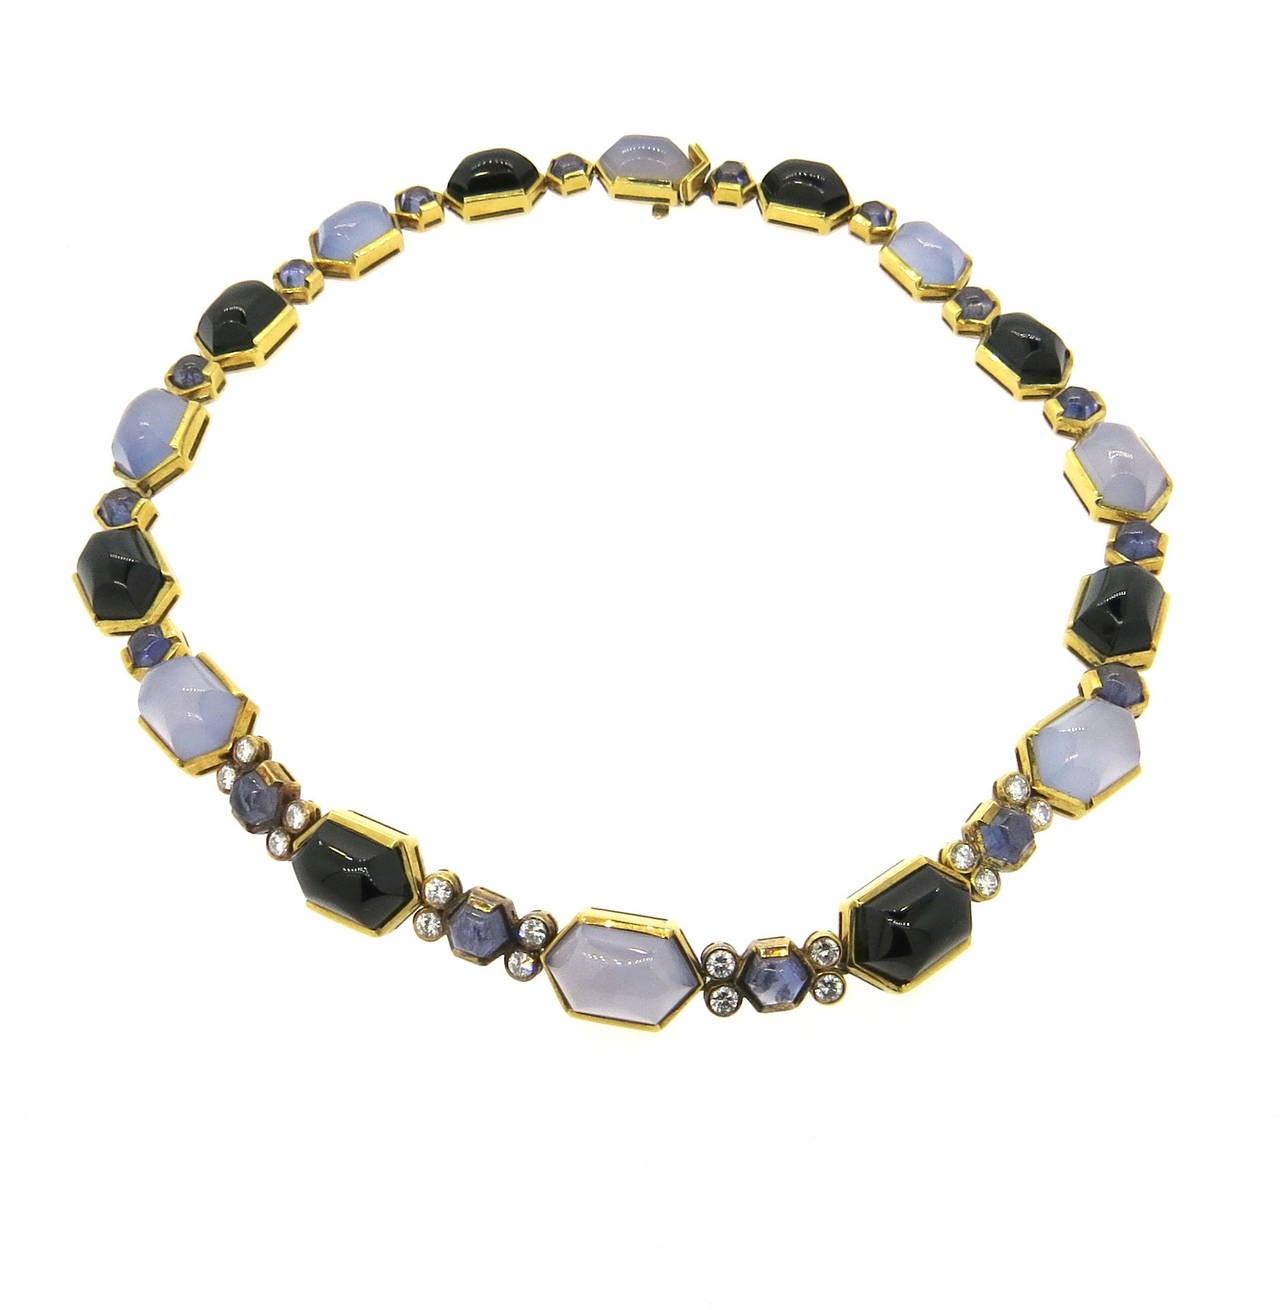 An 18k yellow gold necklace set with approximately 2.00ctw in G/VS diamonds, chalcedony, iolite and onyx.  Crafted in Italy, the necklace is 17" long and 12mm wide.  The piece weighs 85.6 grams.  Marked 750, 18k, Italian Assay Marks, Italy.